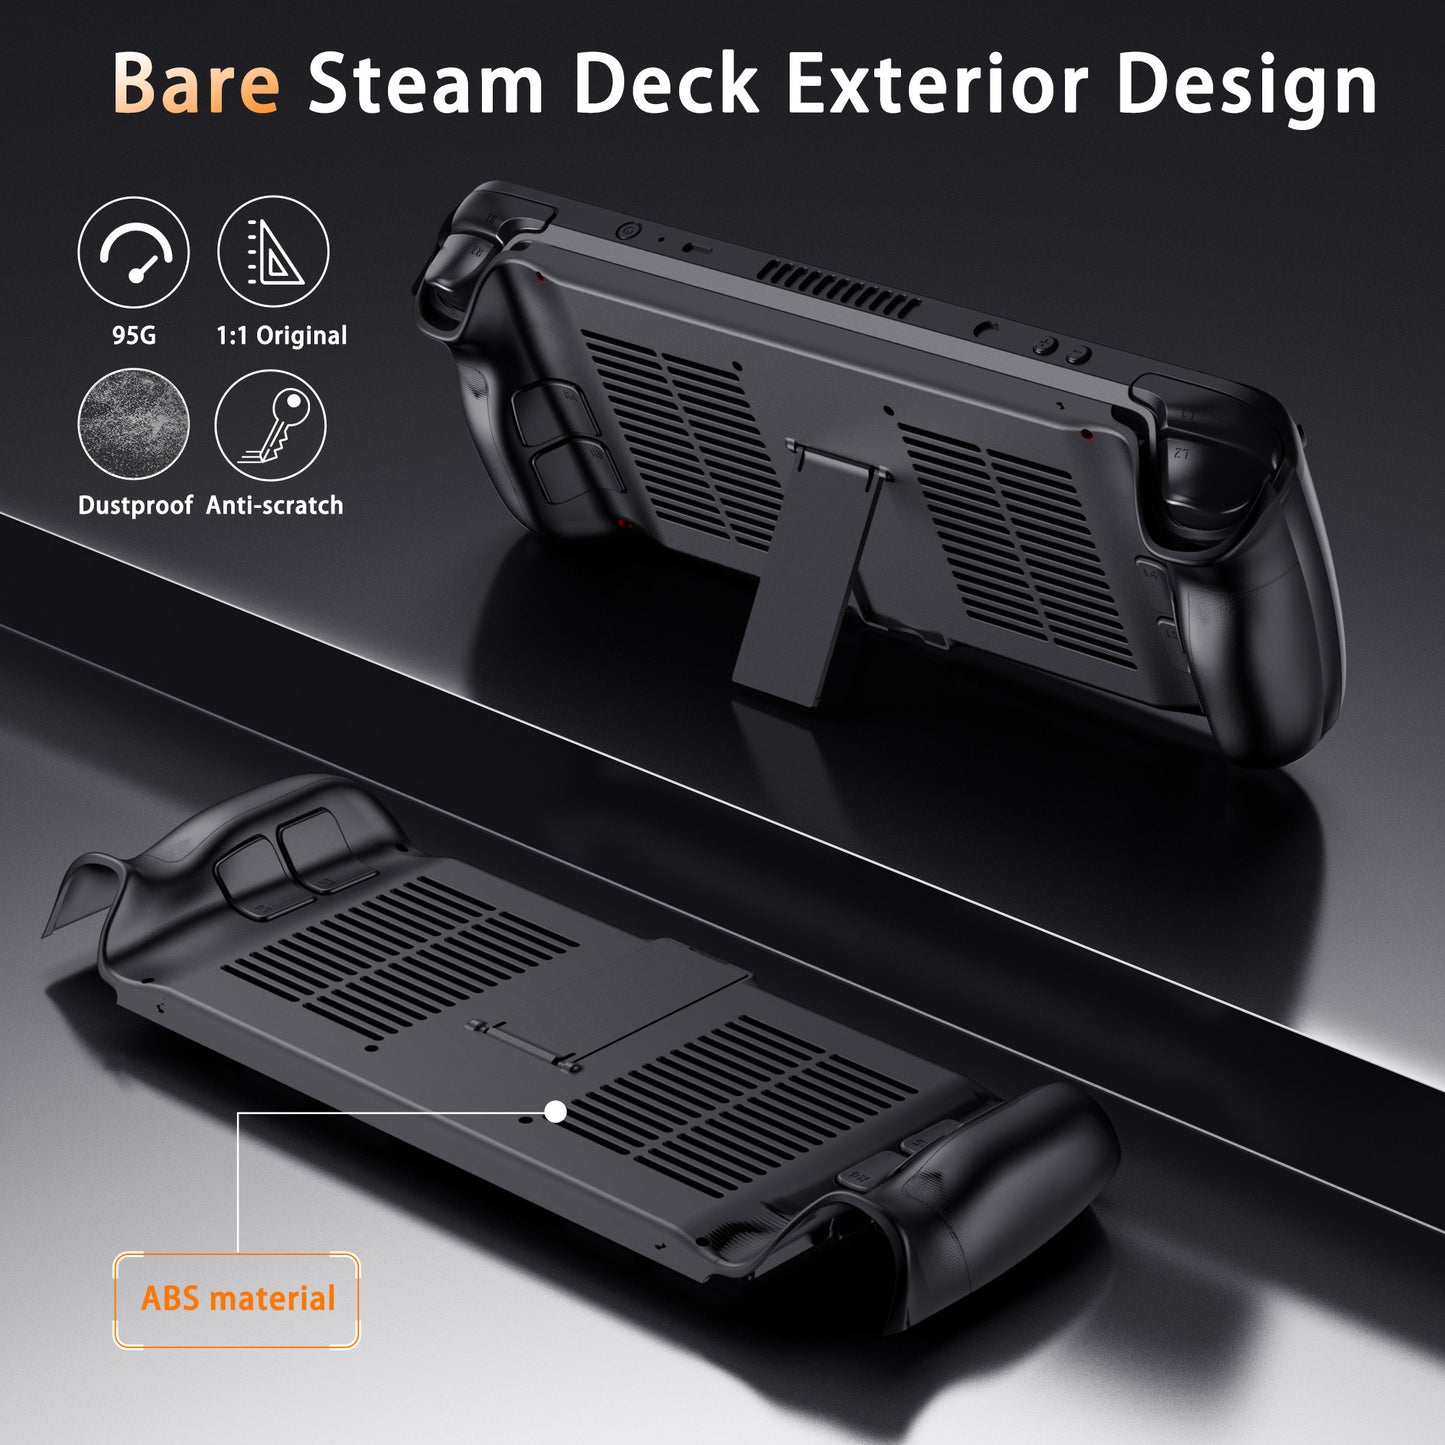 Unique Backshell for Steam Deck Case with Cooling Vents and Stand, Anti-Scratch Dustproof Protective Steam Deck Cover, Premium ABS Replacement Shell for Steam Deck Accessories